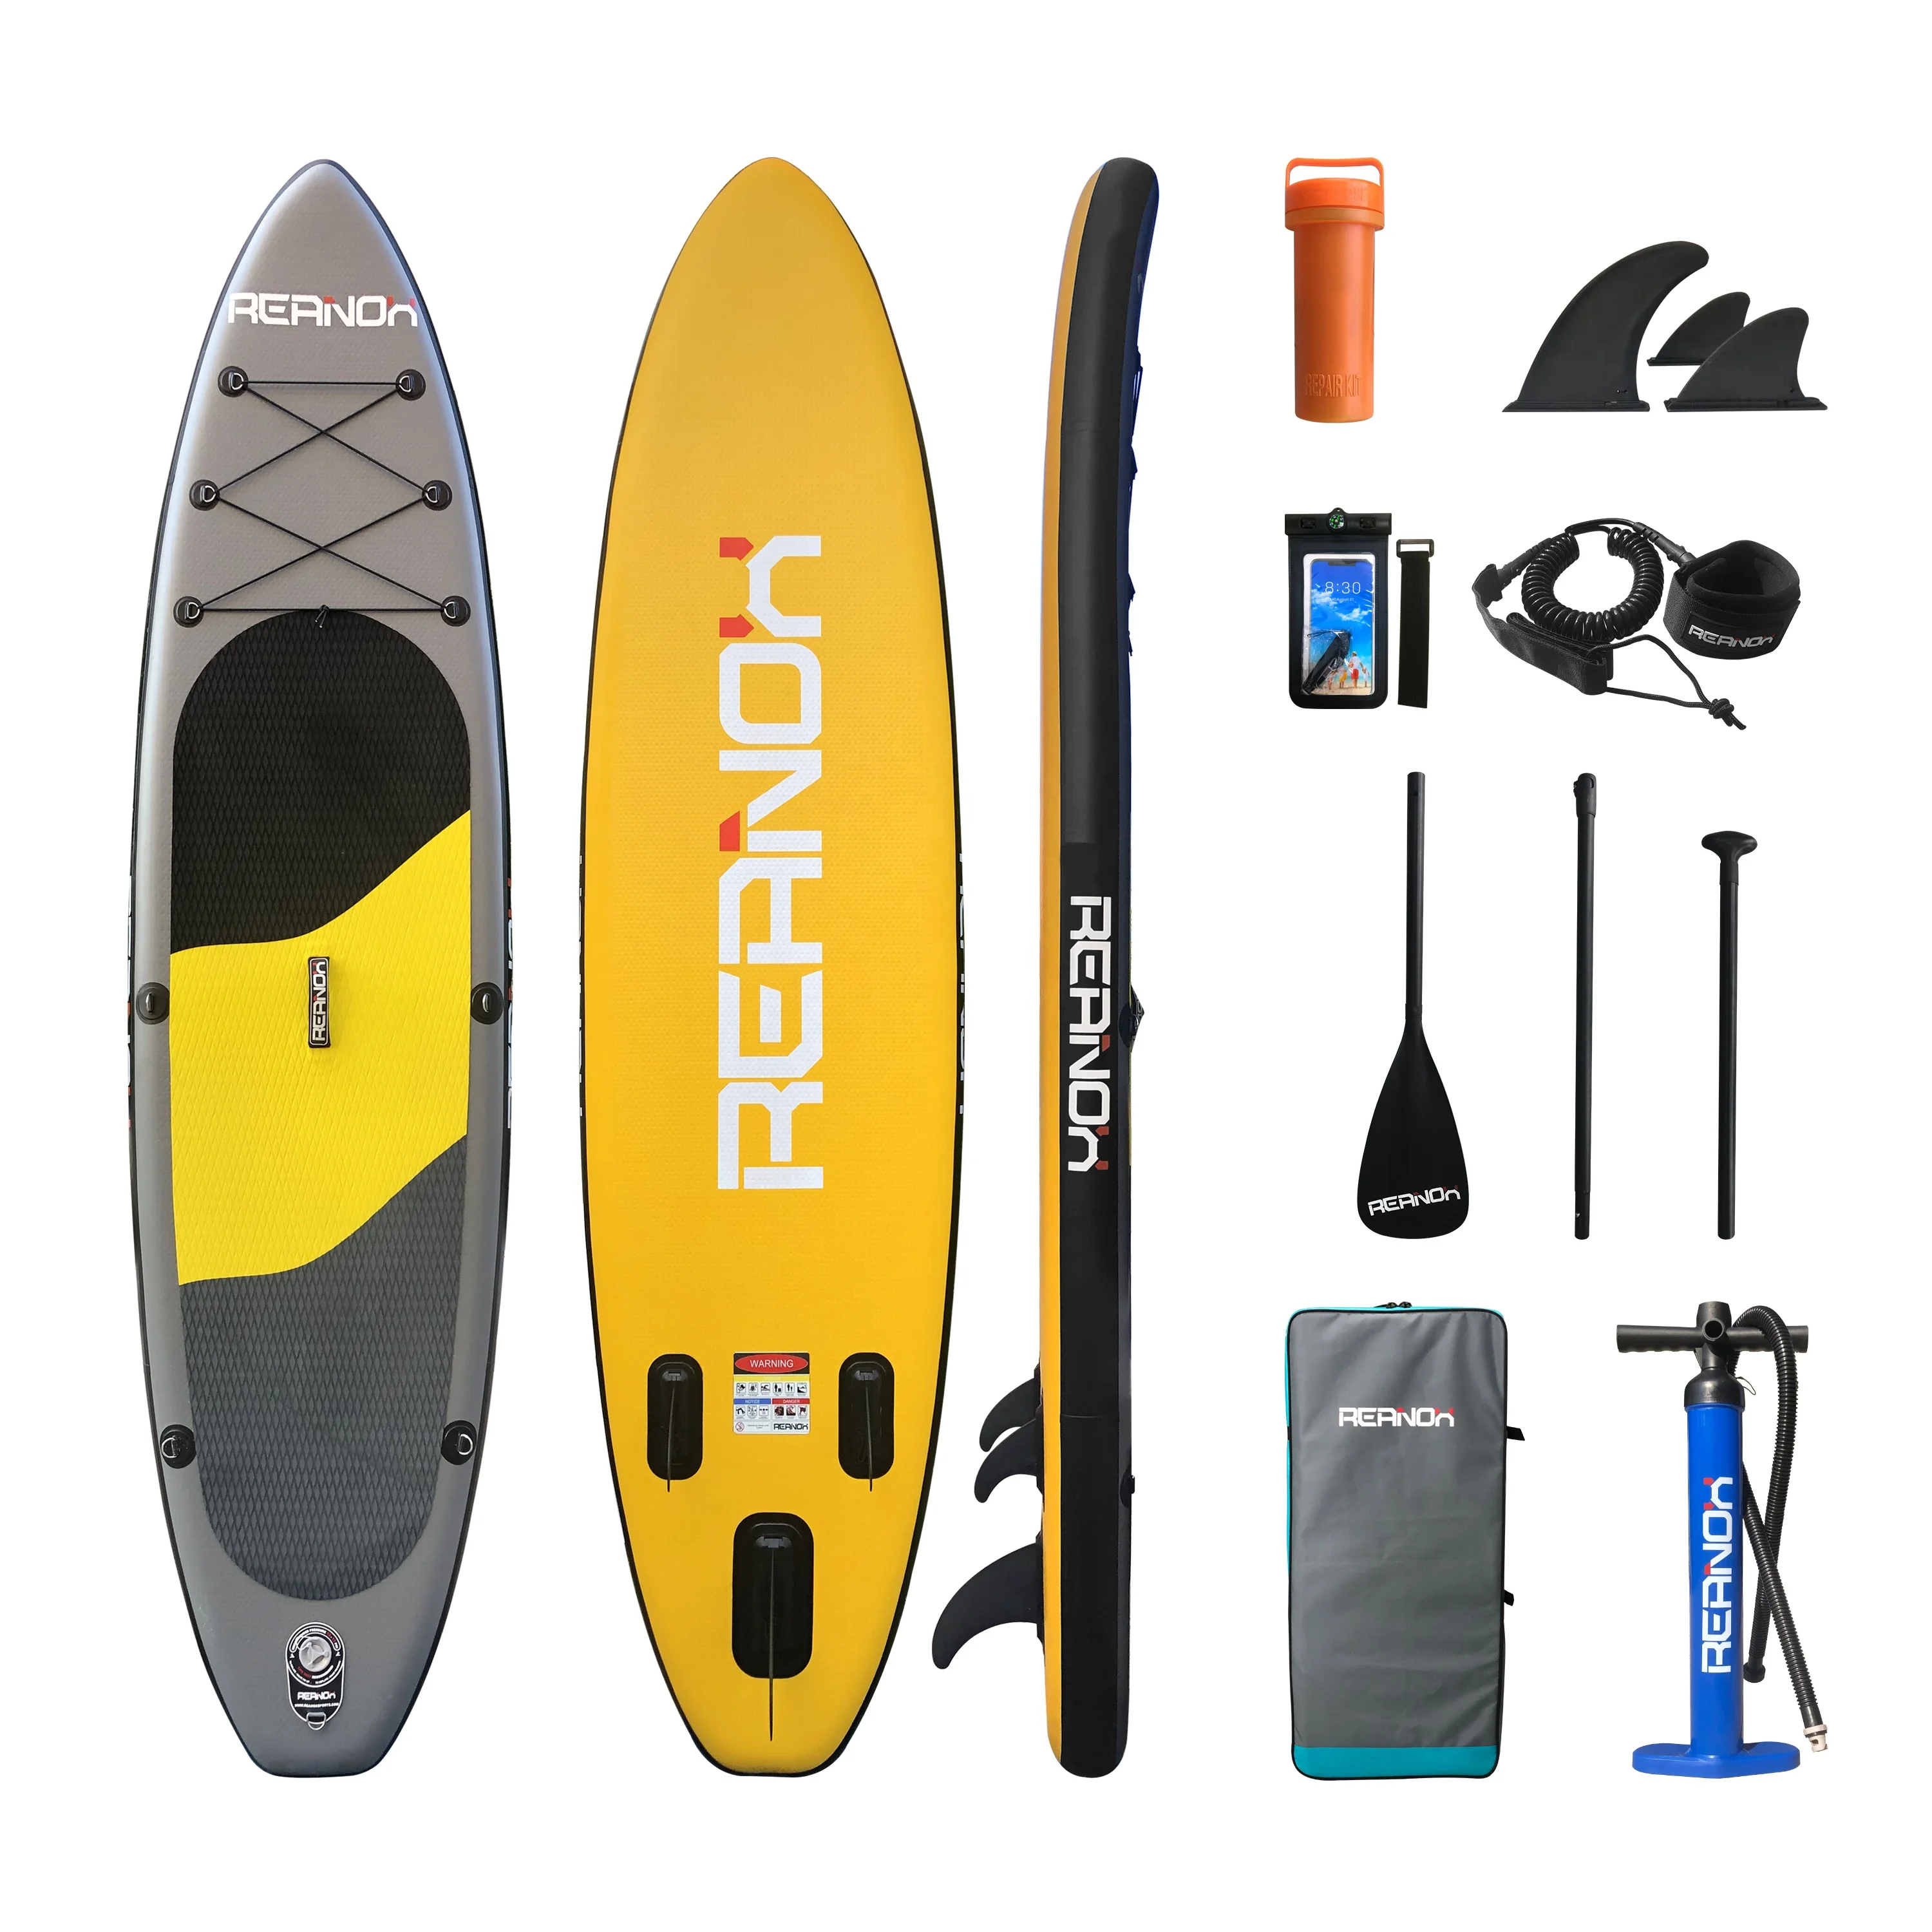 

2022 New design customized 10' stand up paddle board serenelife inflatable stand up paddle board touring sup board, Customized color